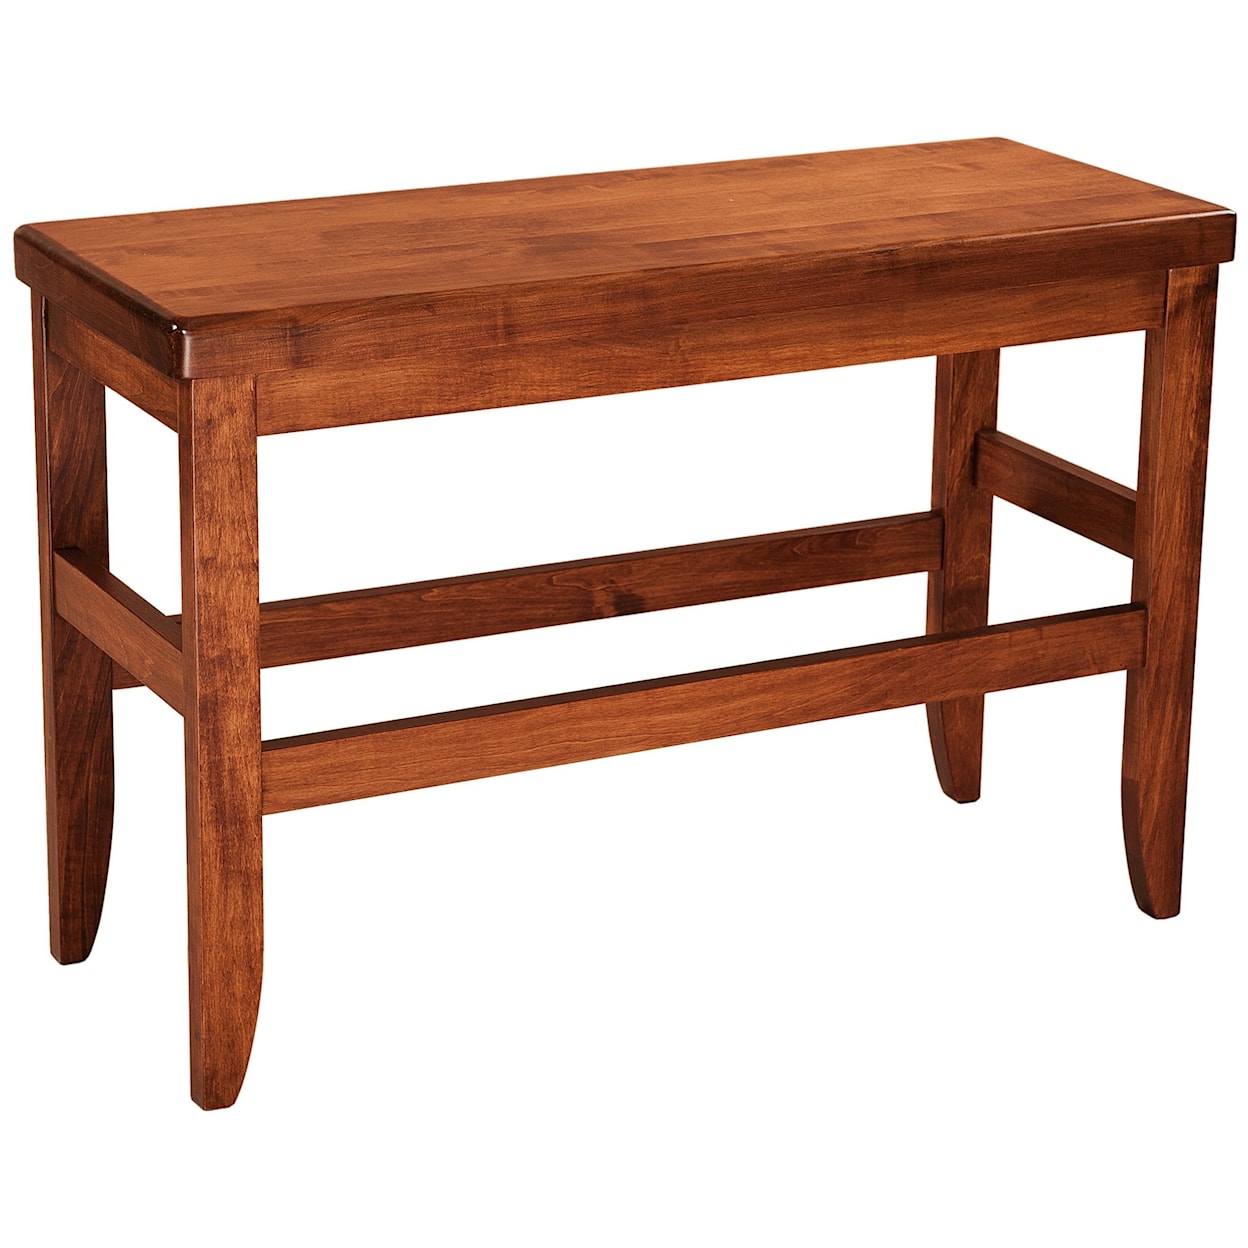 F&N Woodworking Clifton Bench 24"h x 48"w - Wood Seat